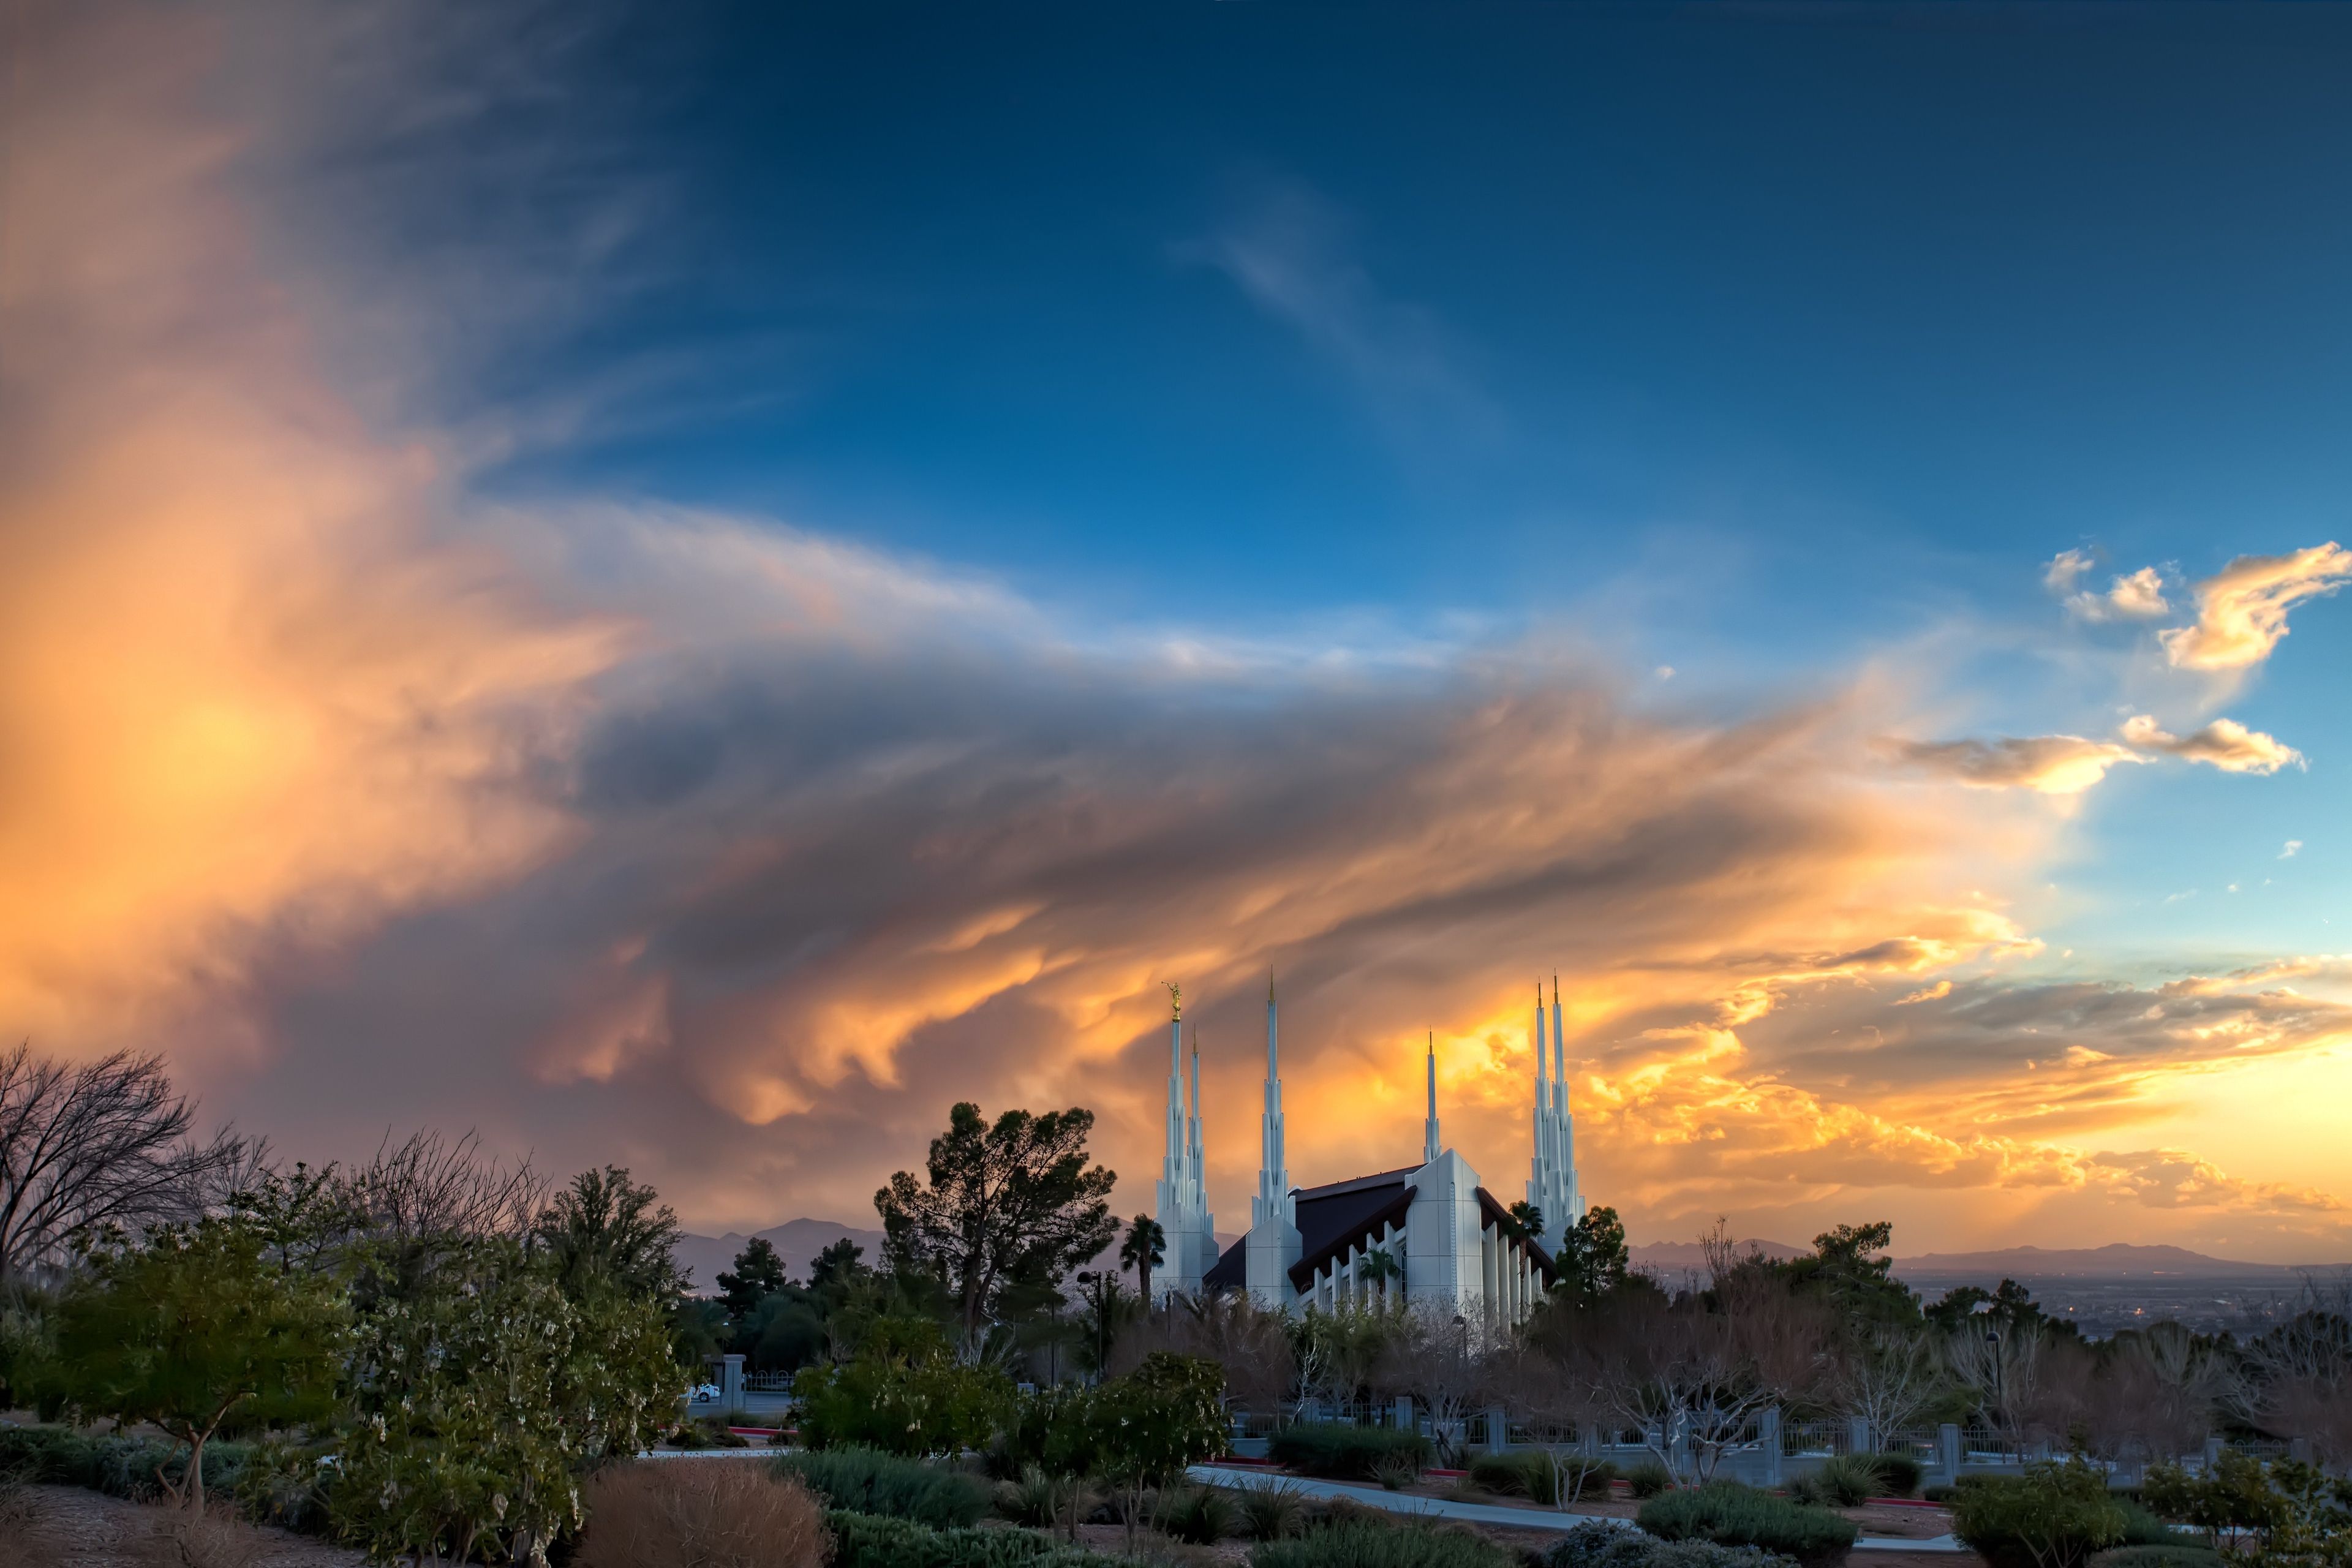 The Las Vegas Nevada Temple at sunset, including scenery.